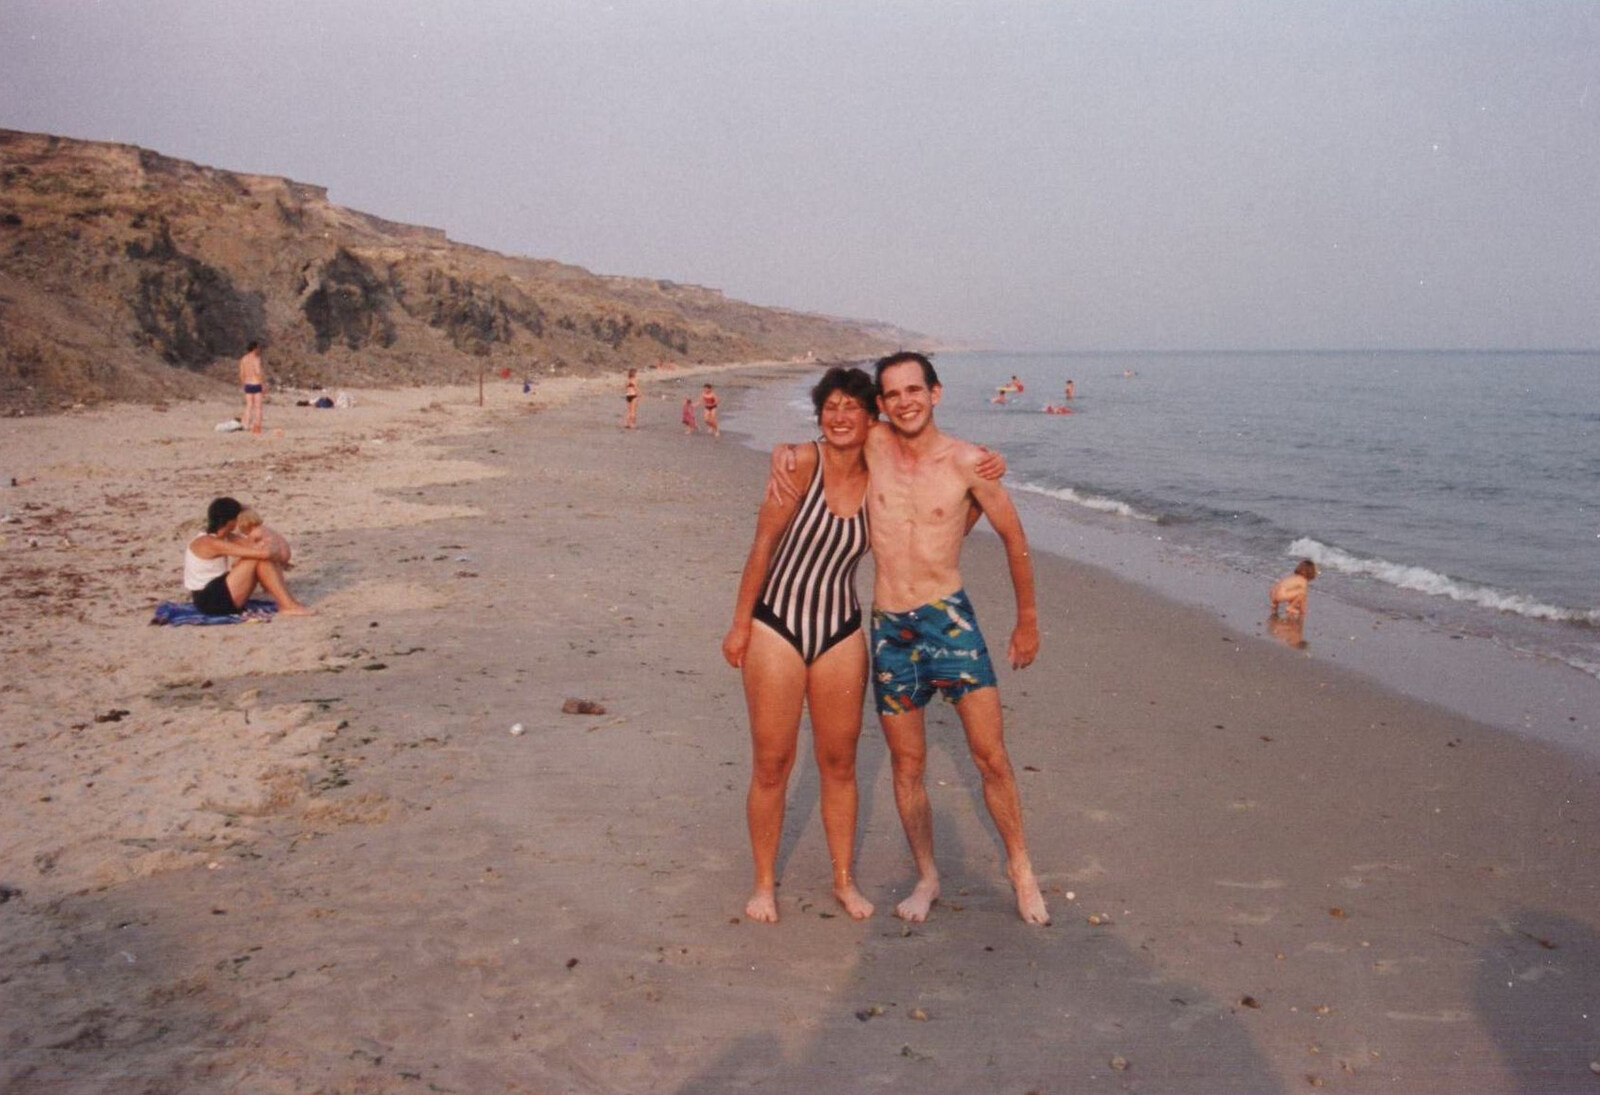 Angela and Phil on the beach at Chewton Bunny from Back from Uni: Yarmouth, Alum Bay and Barton-on-sea, Hampshire - 23rd July 1989